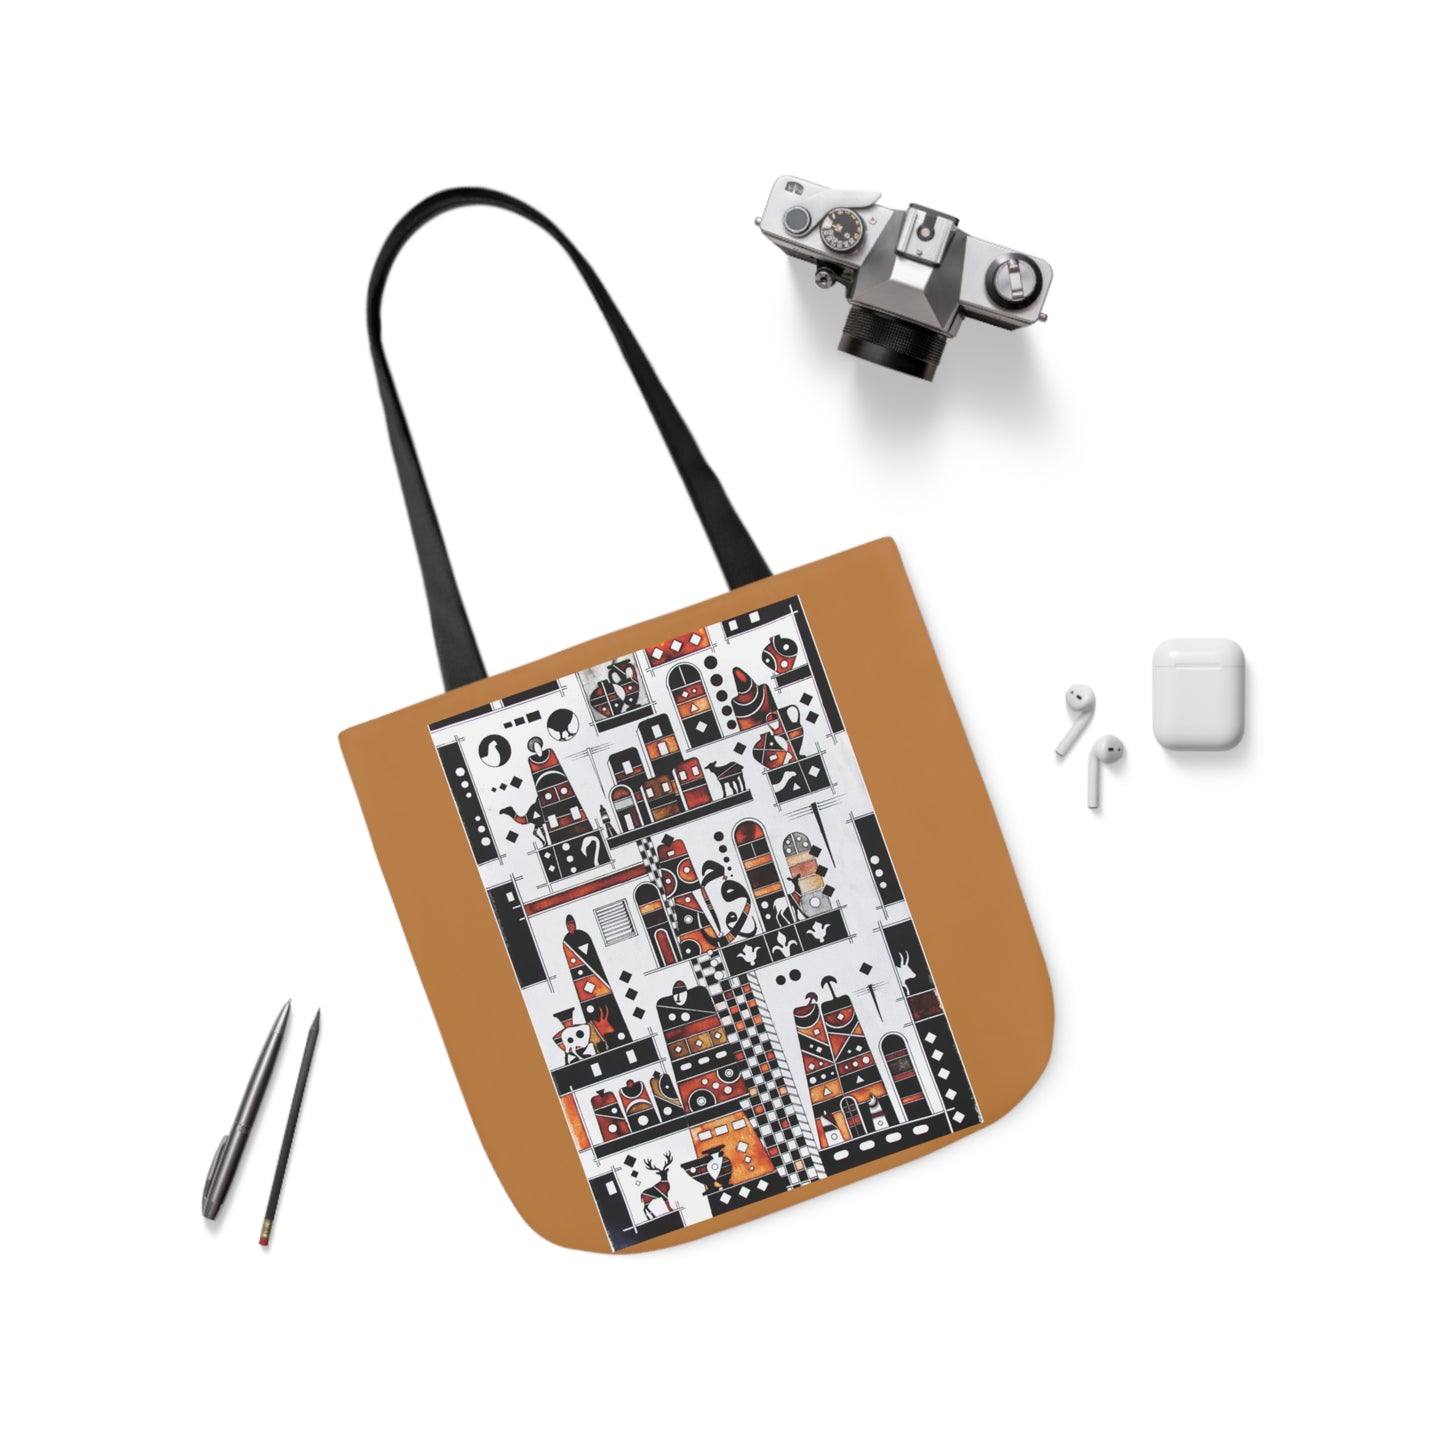 Glimpes Canvas Tote Bag